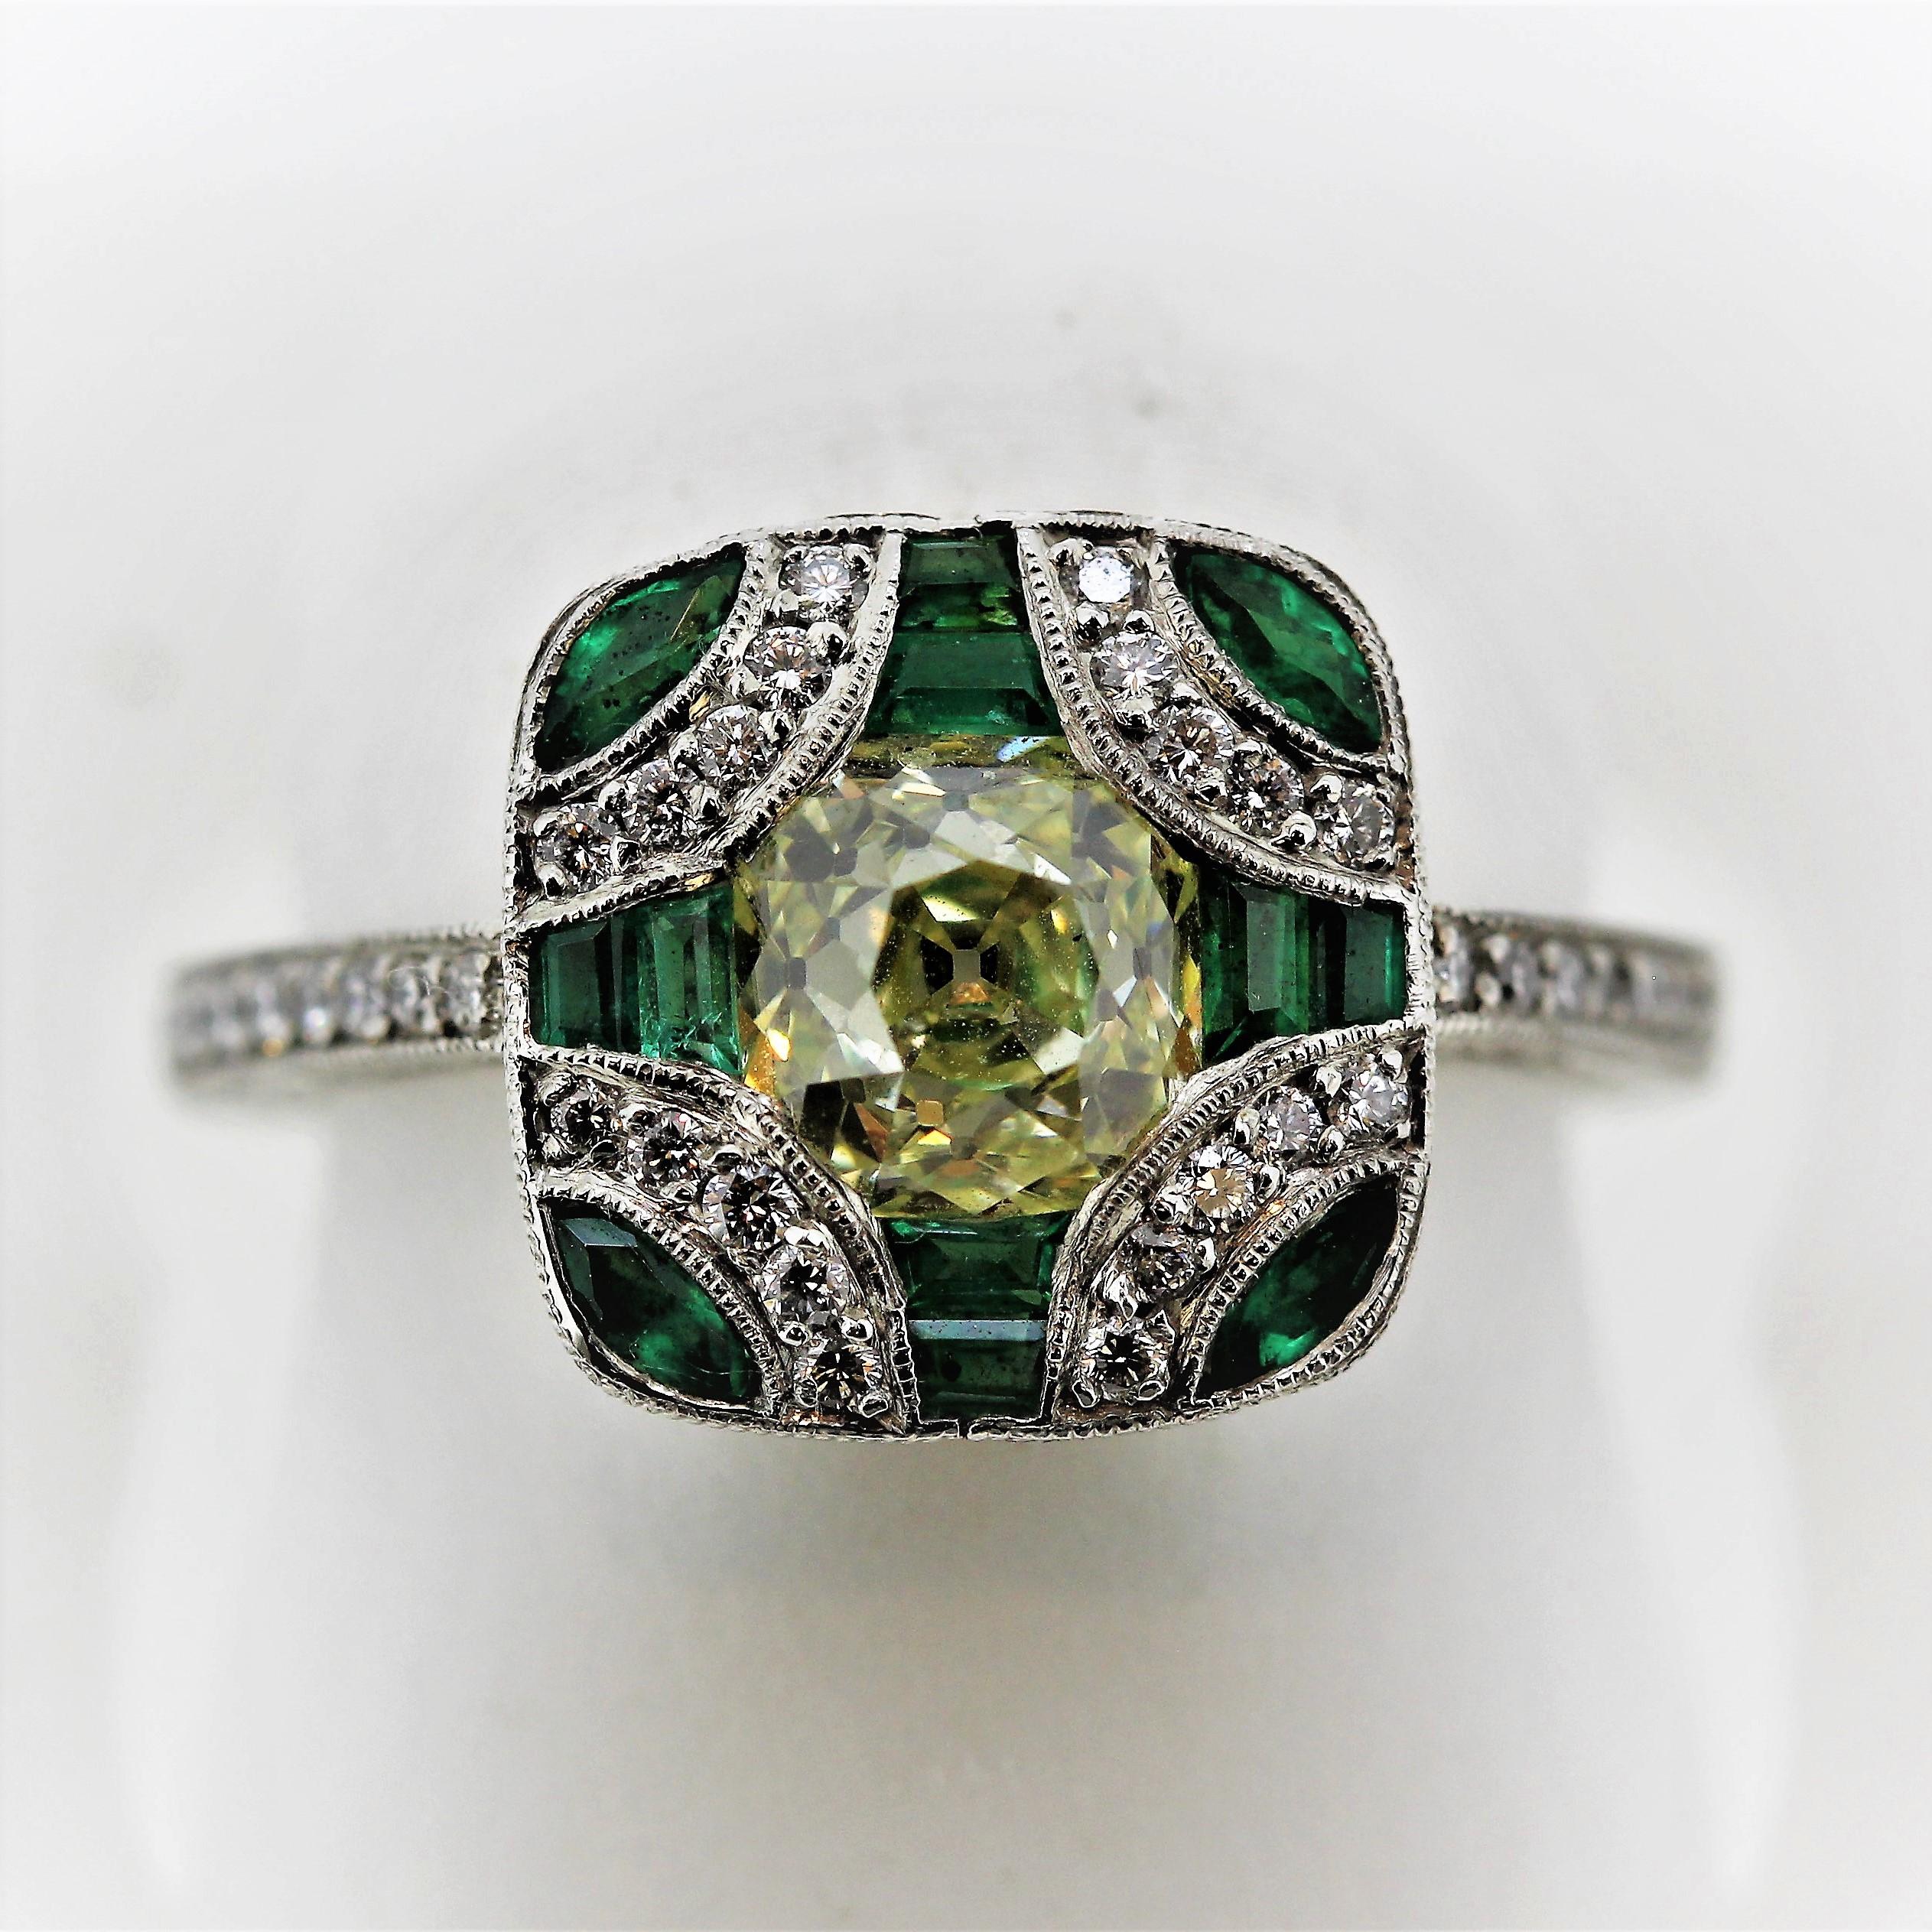 Antique Edwardian Style Fancy Yellow Old Mine Cut Diamond and Emerald Ring im Angebot 5